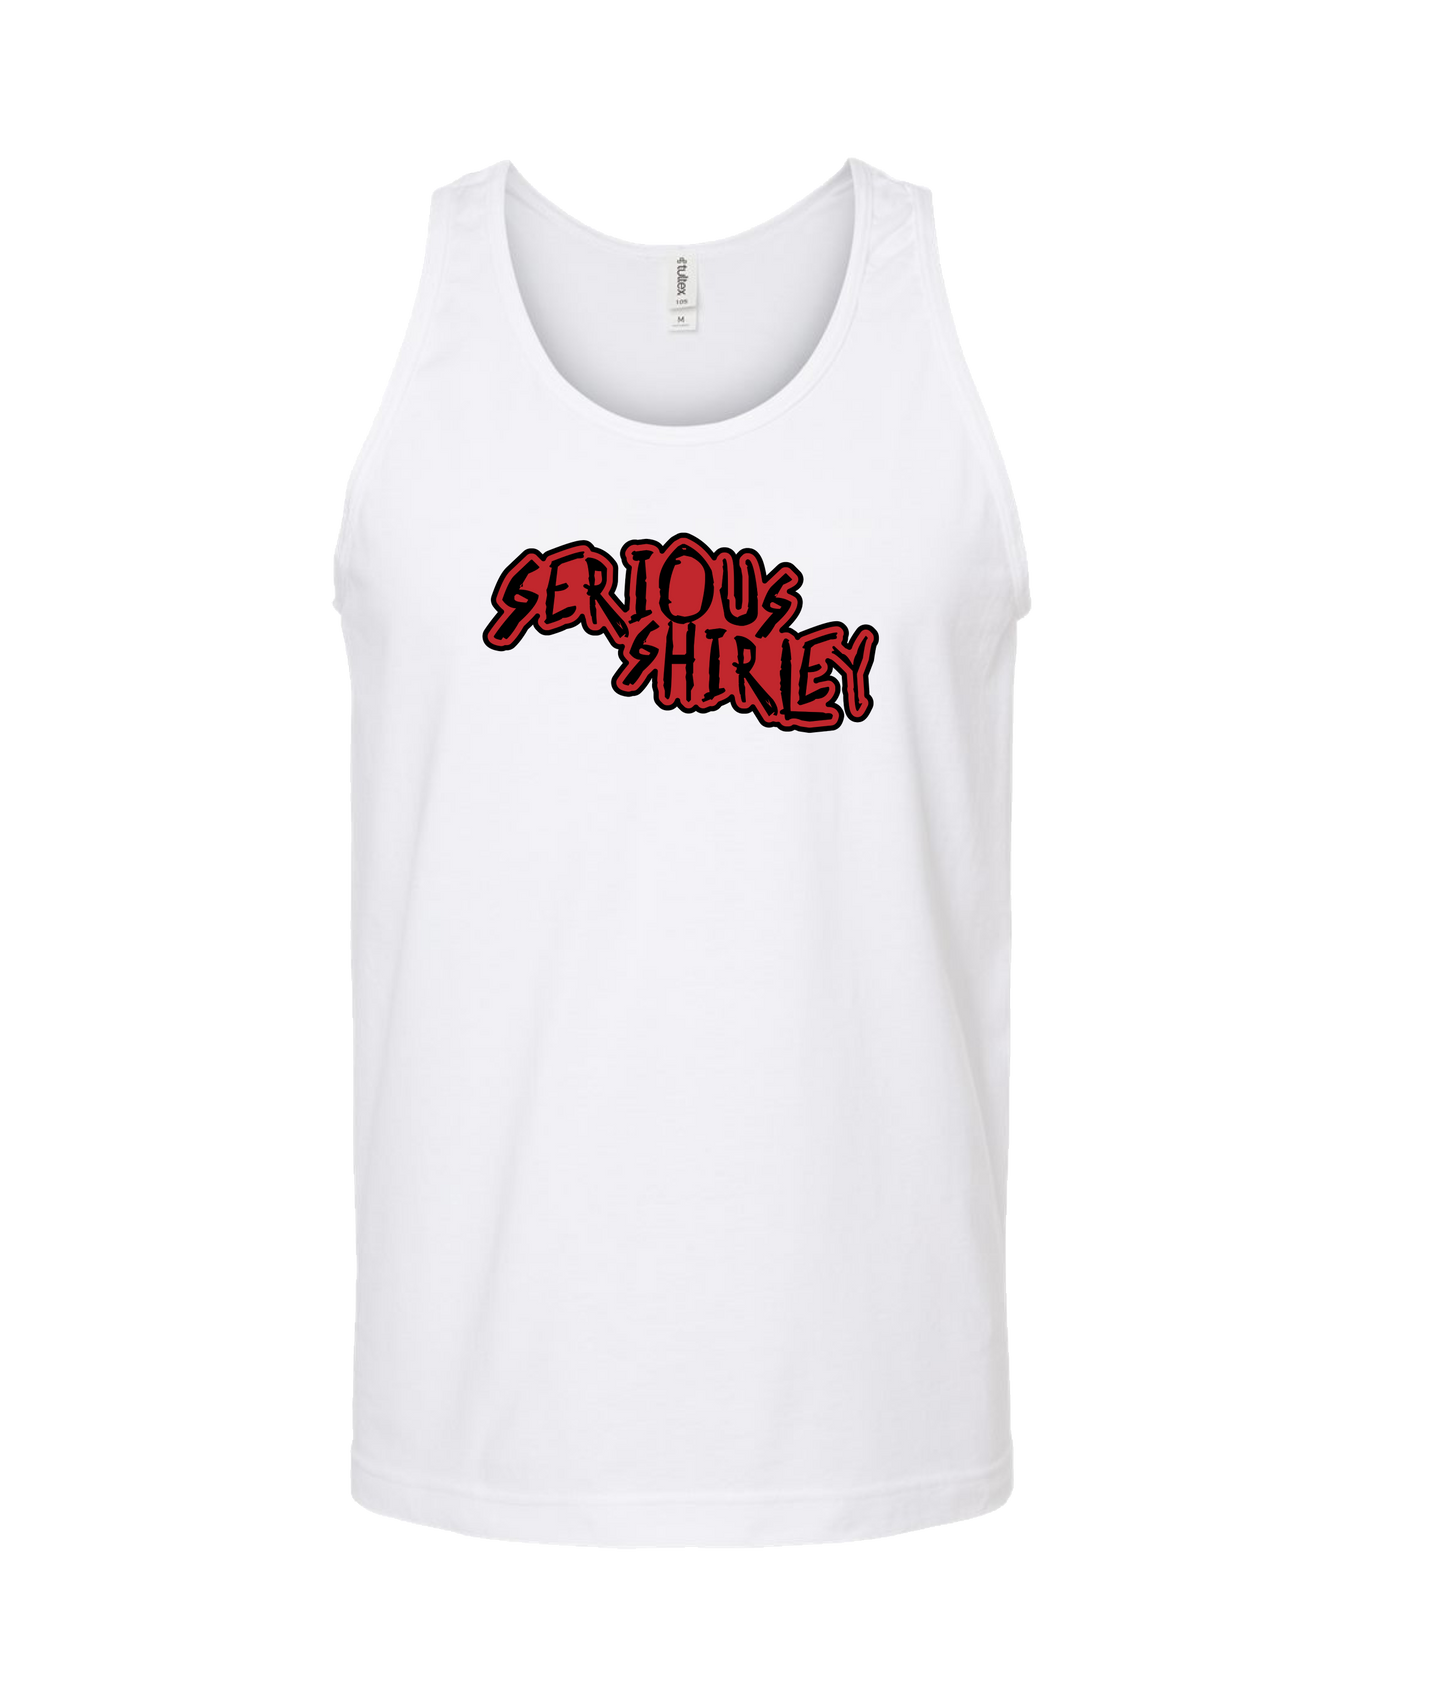 Serious Shirley - Red Scratch - White Tank Top